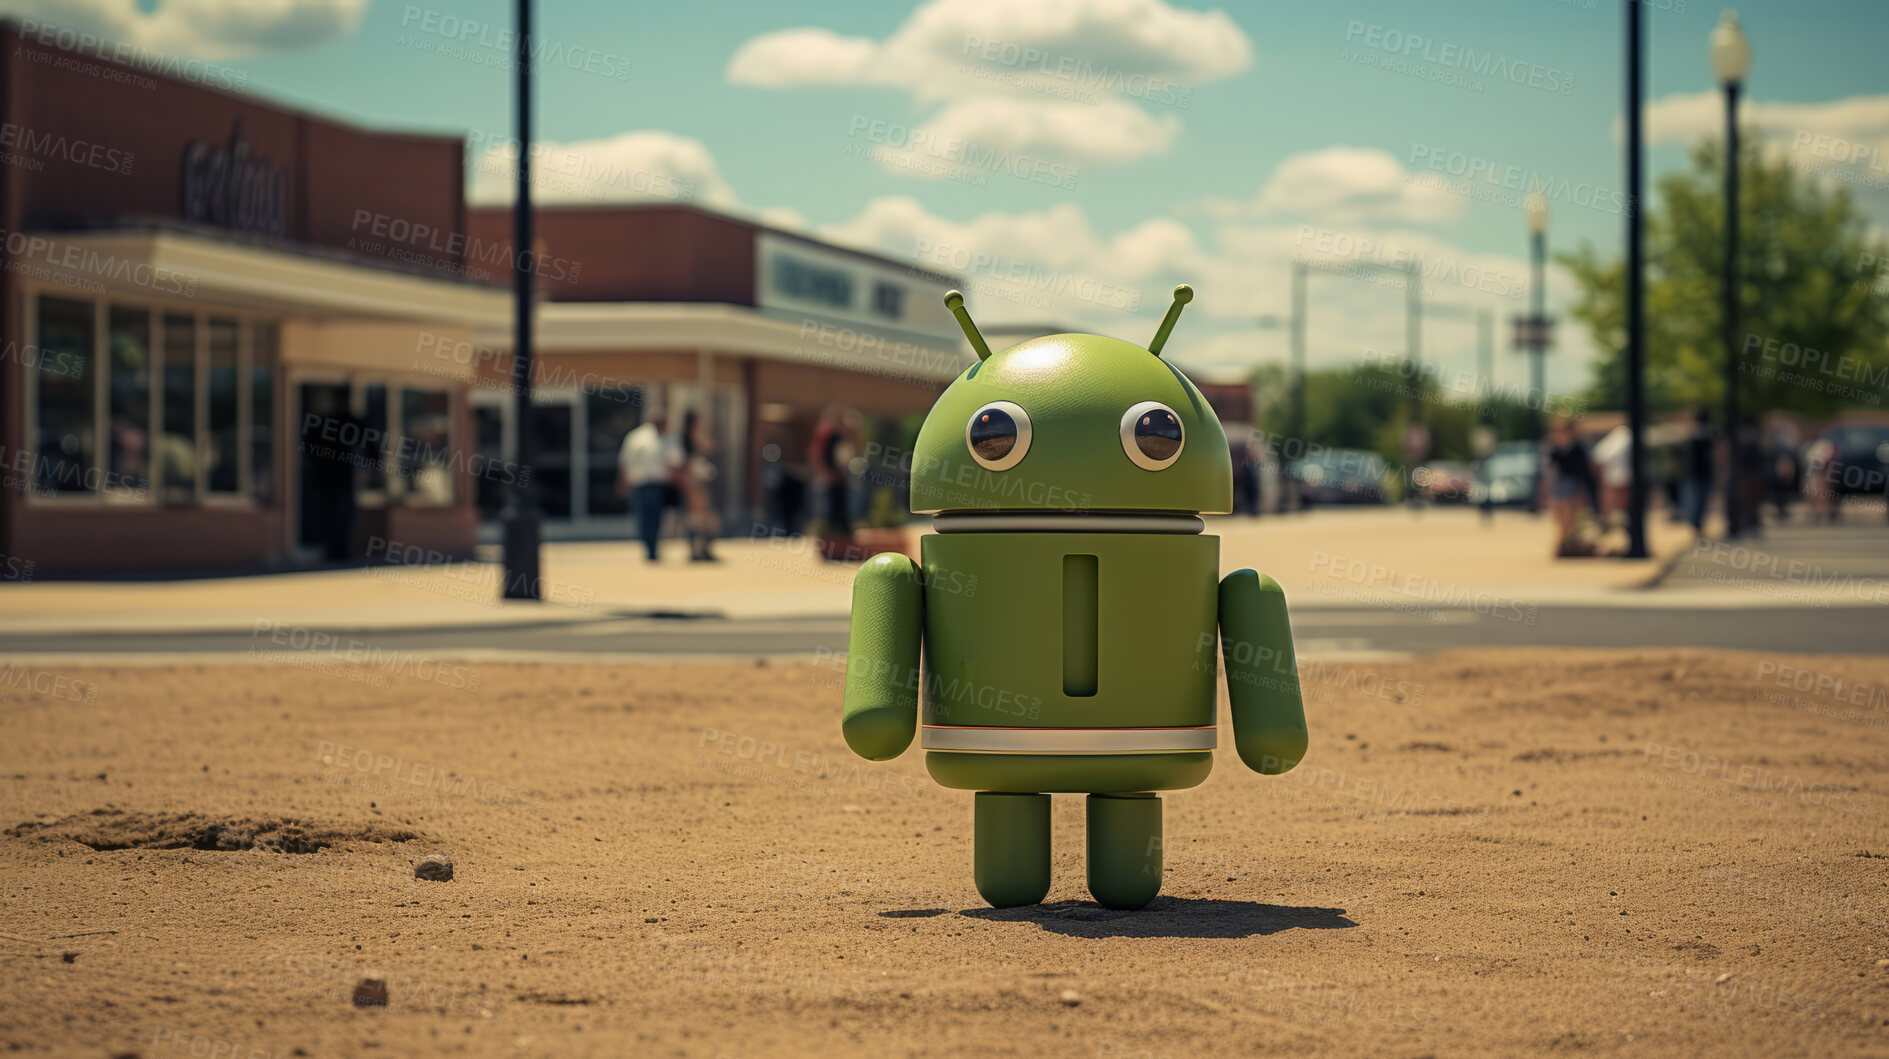 Buy stock photo Portrait of rusty android robot on field. Photo-realistic southern town scenes.